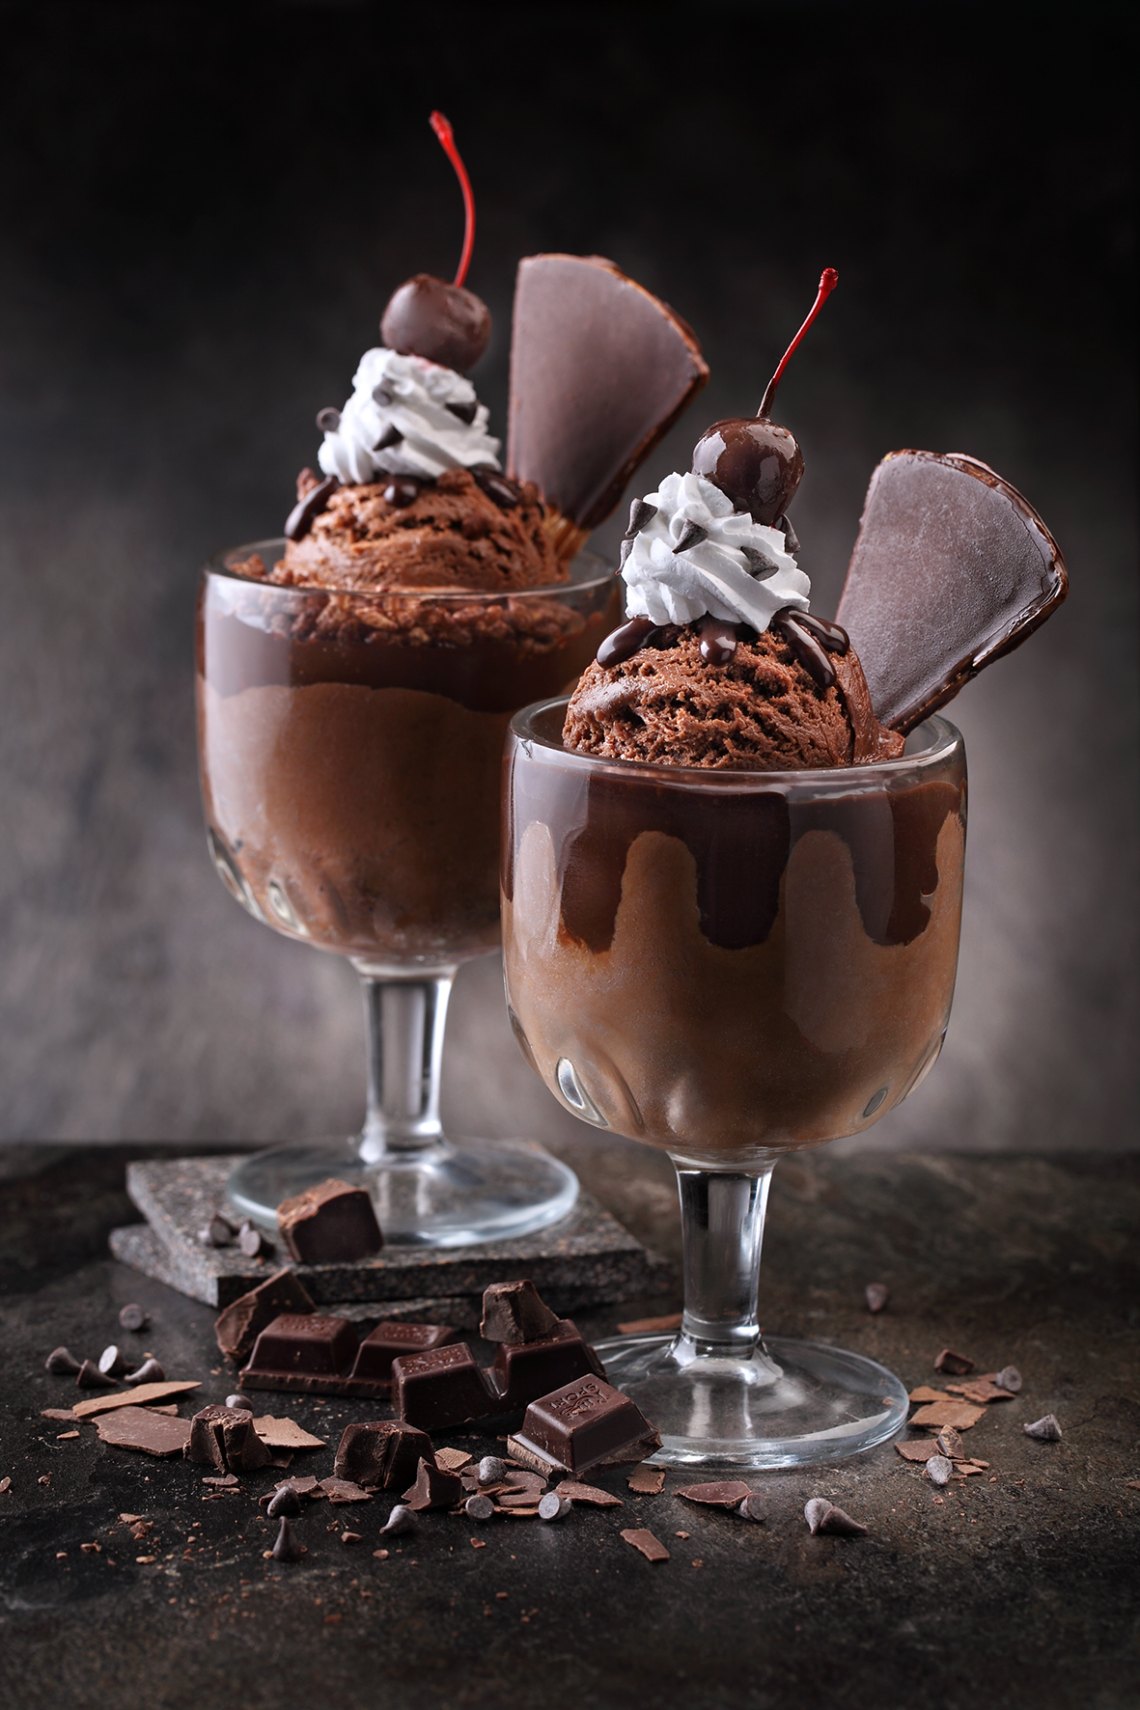 Two Sticky Chewy Chocolate Sundaes side by side